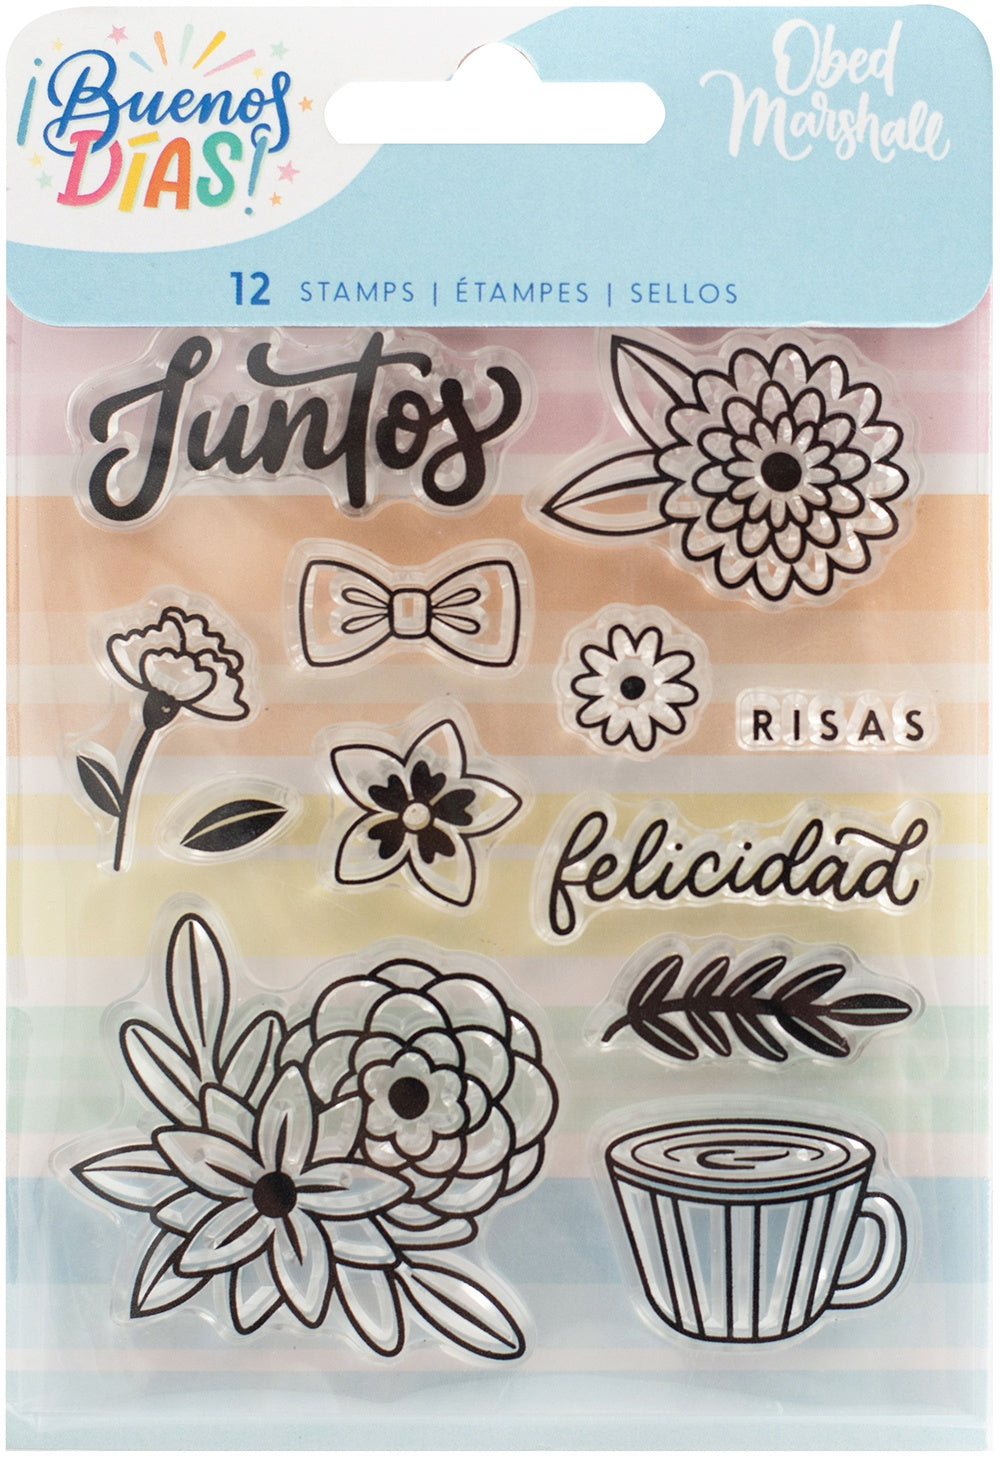 Obed Marshall Buenos Dias Acrylic Stamps 12/Pkg – American Crafts